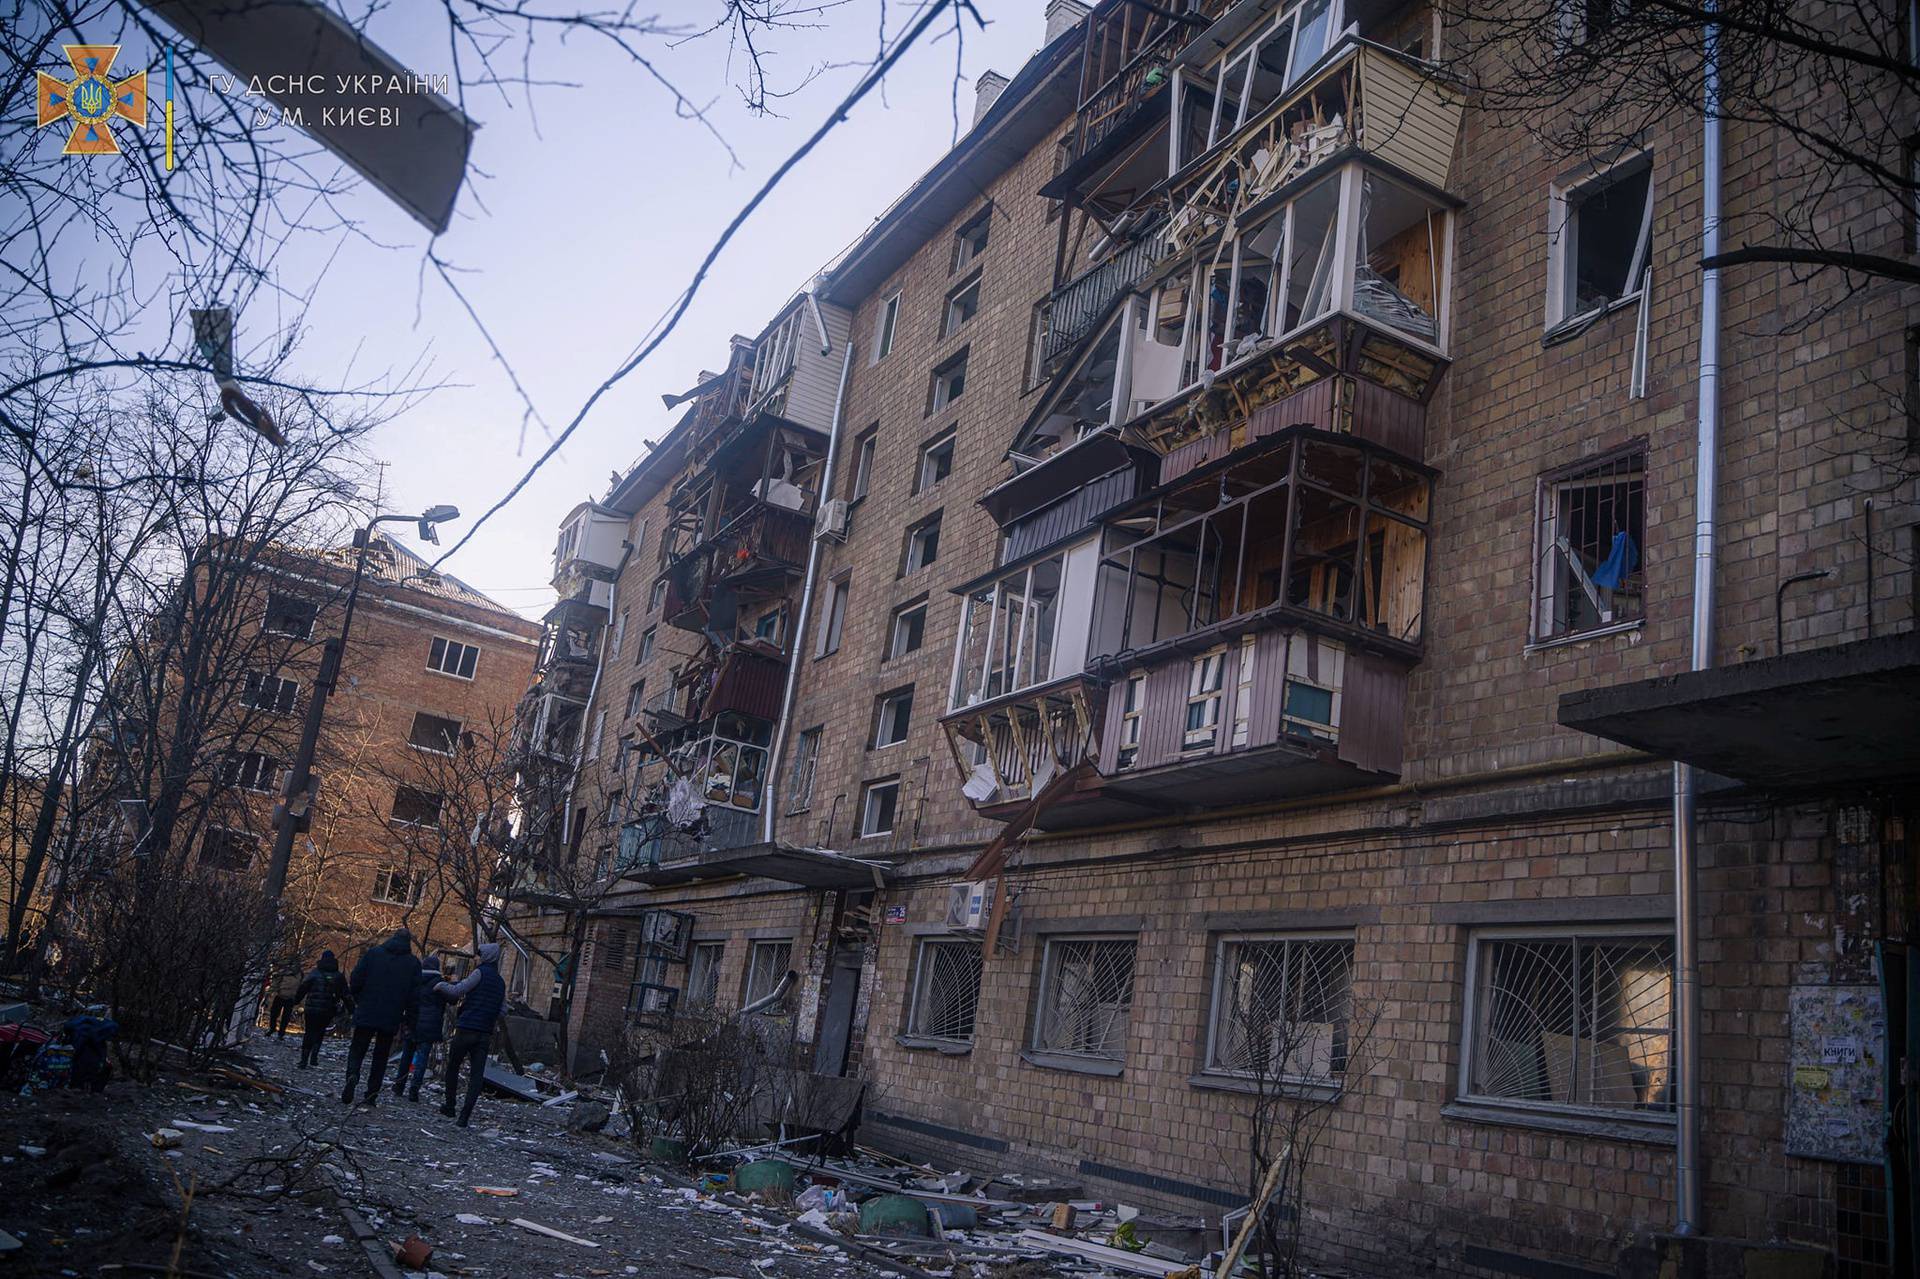 Locals walk next to a residential building damaged by shelling in Kyiv